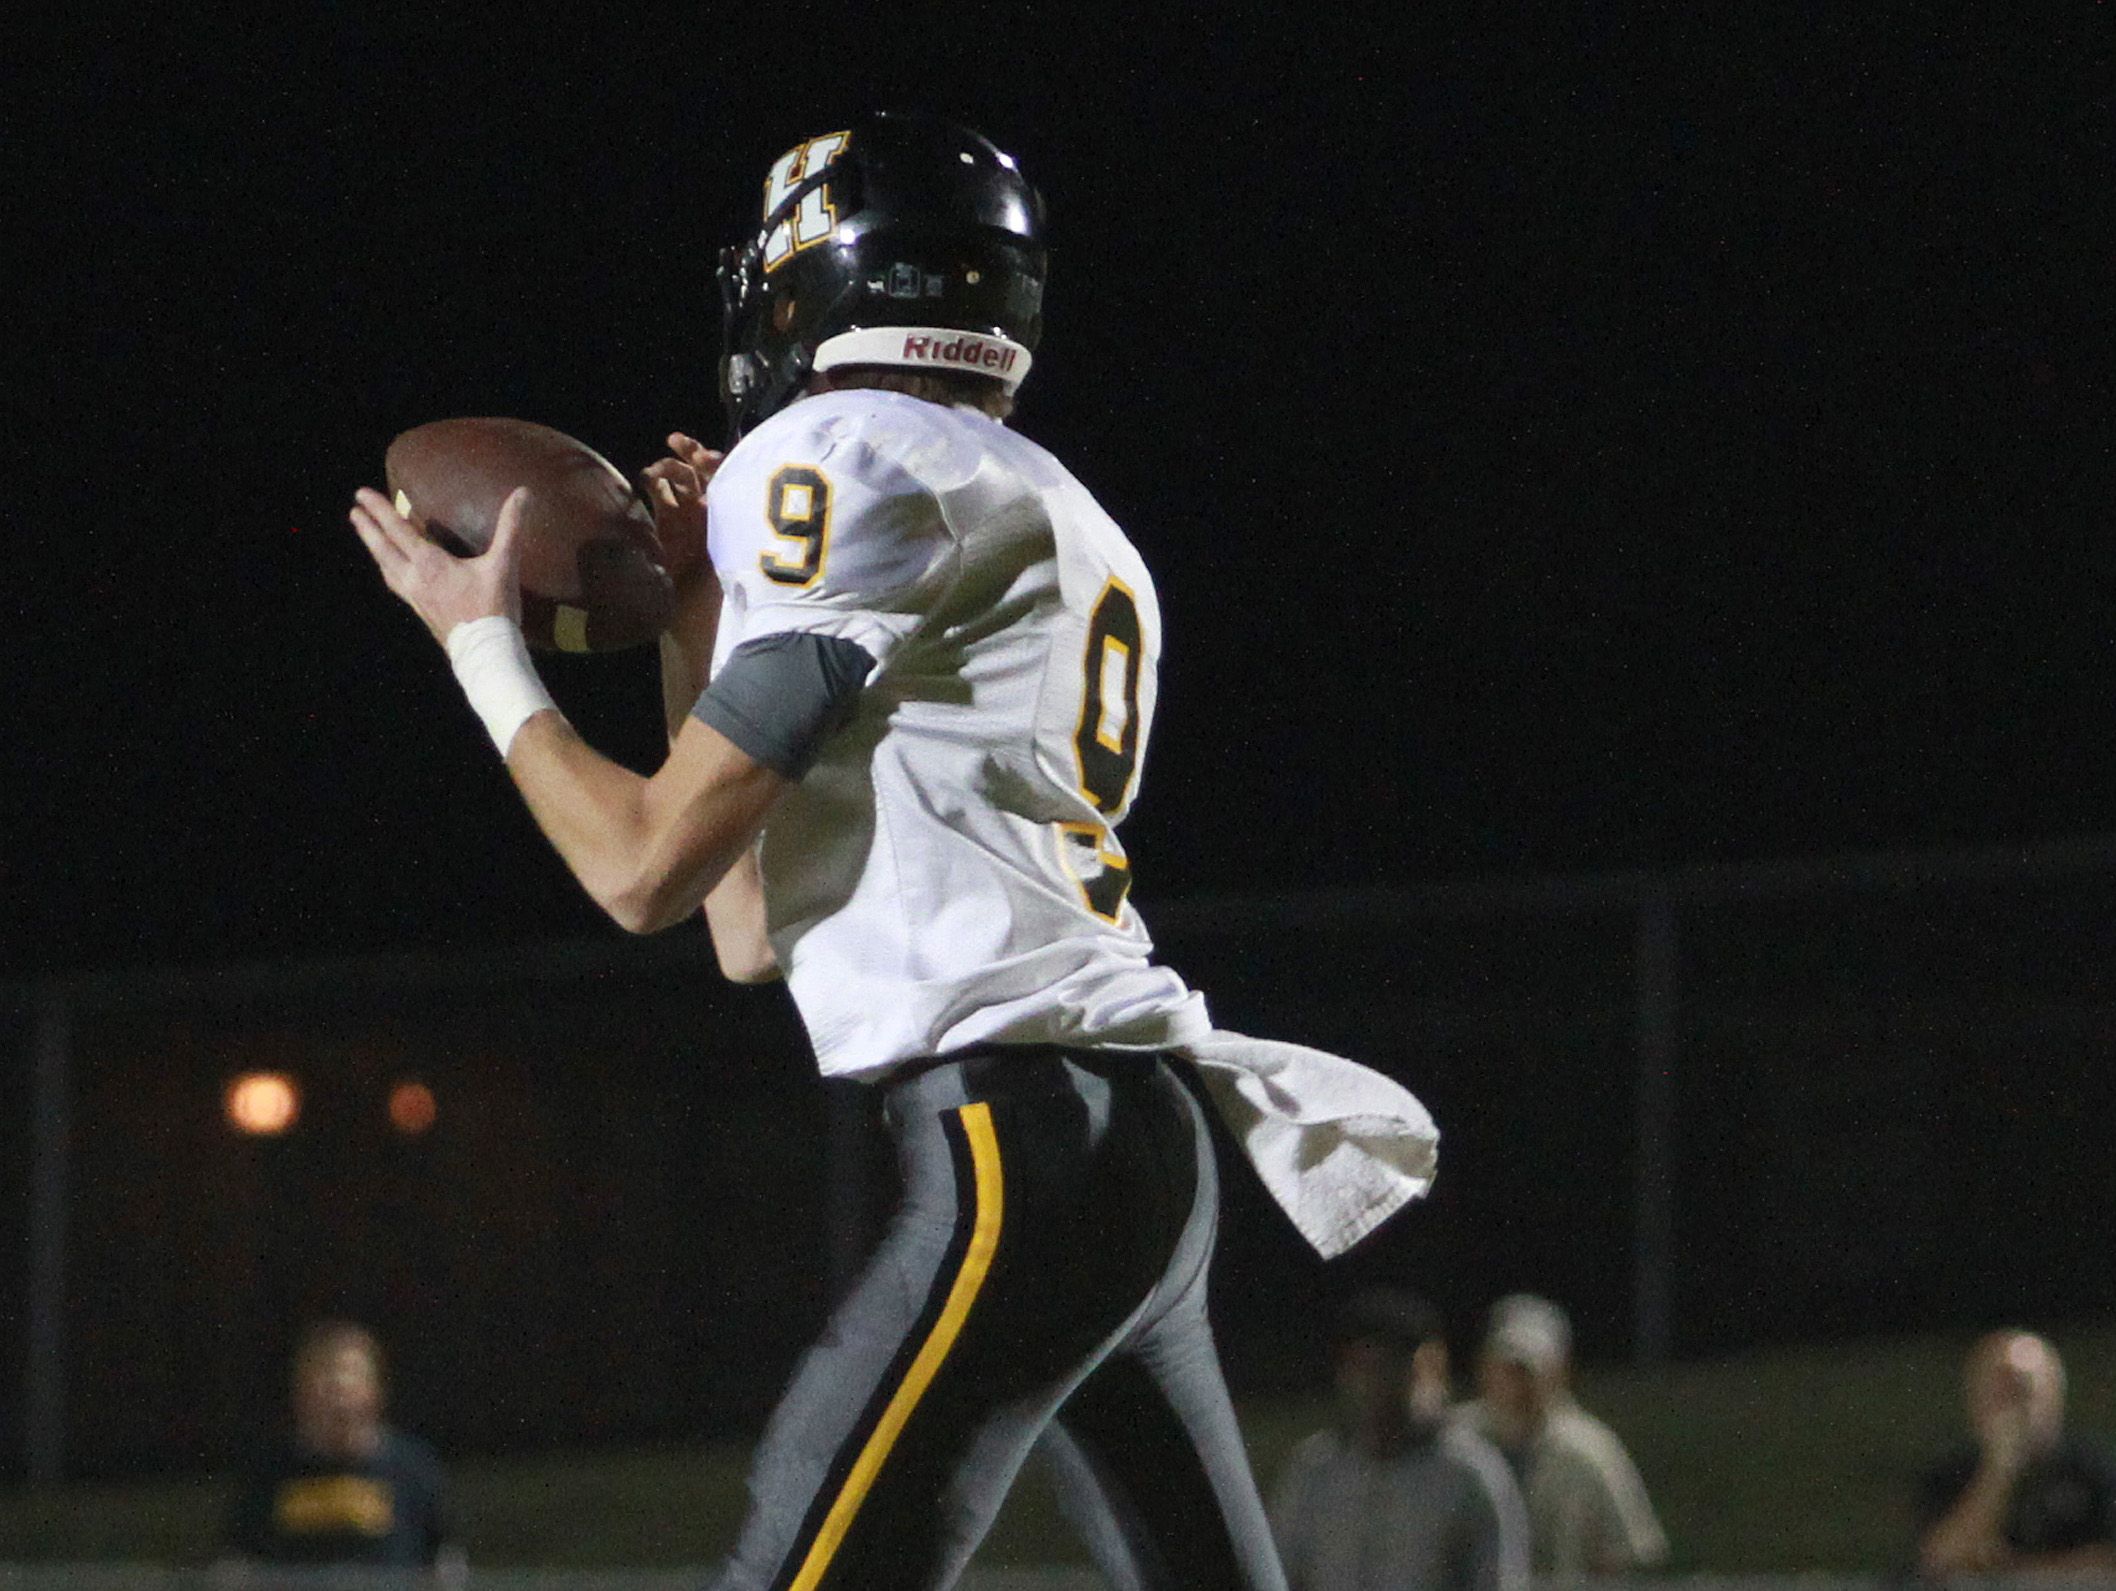 Hendersonville's Clay Richard goes up for an interception that he returned for a touchdown against Hunters Lane in Nashville, TN on Fri. Oct. 28, 2016.